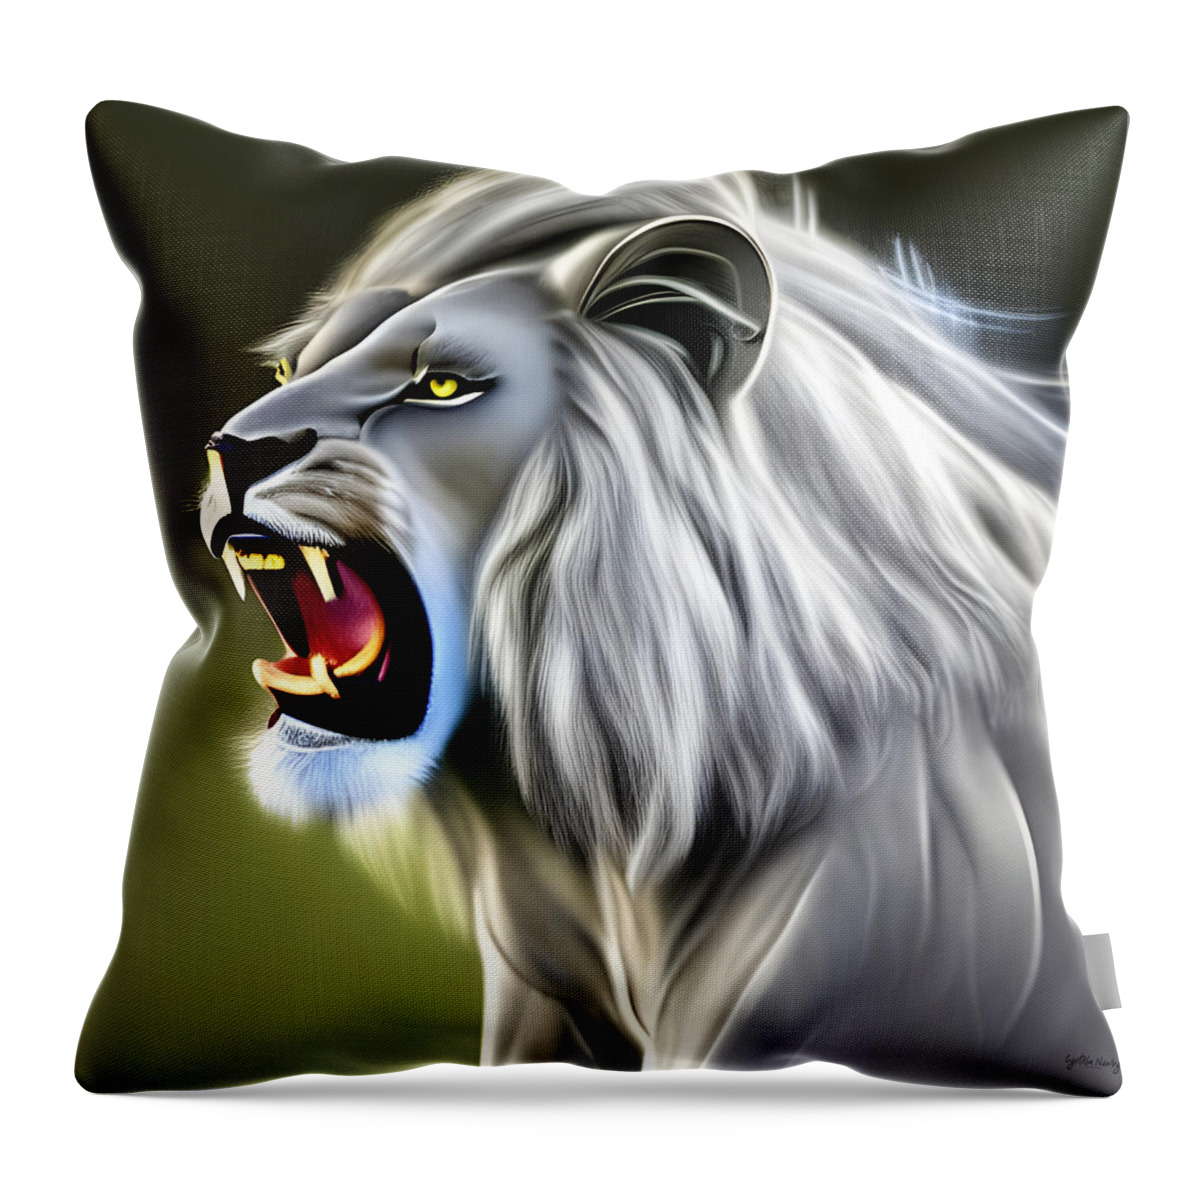 Newby Throw Pillow featuring the digital art Roaring White Lion by Cindy's Creative Corner